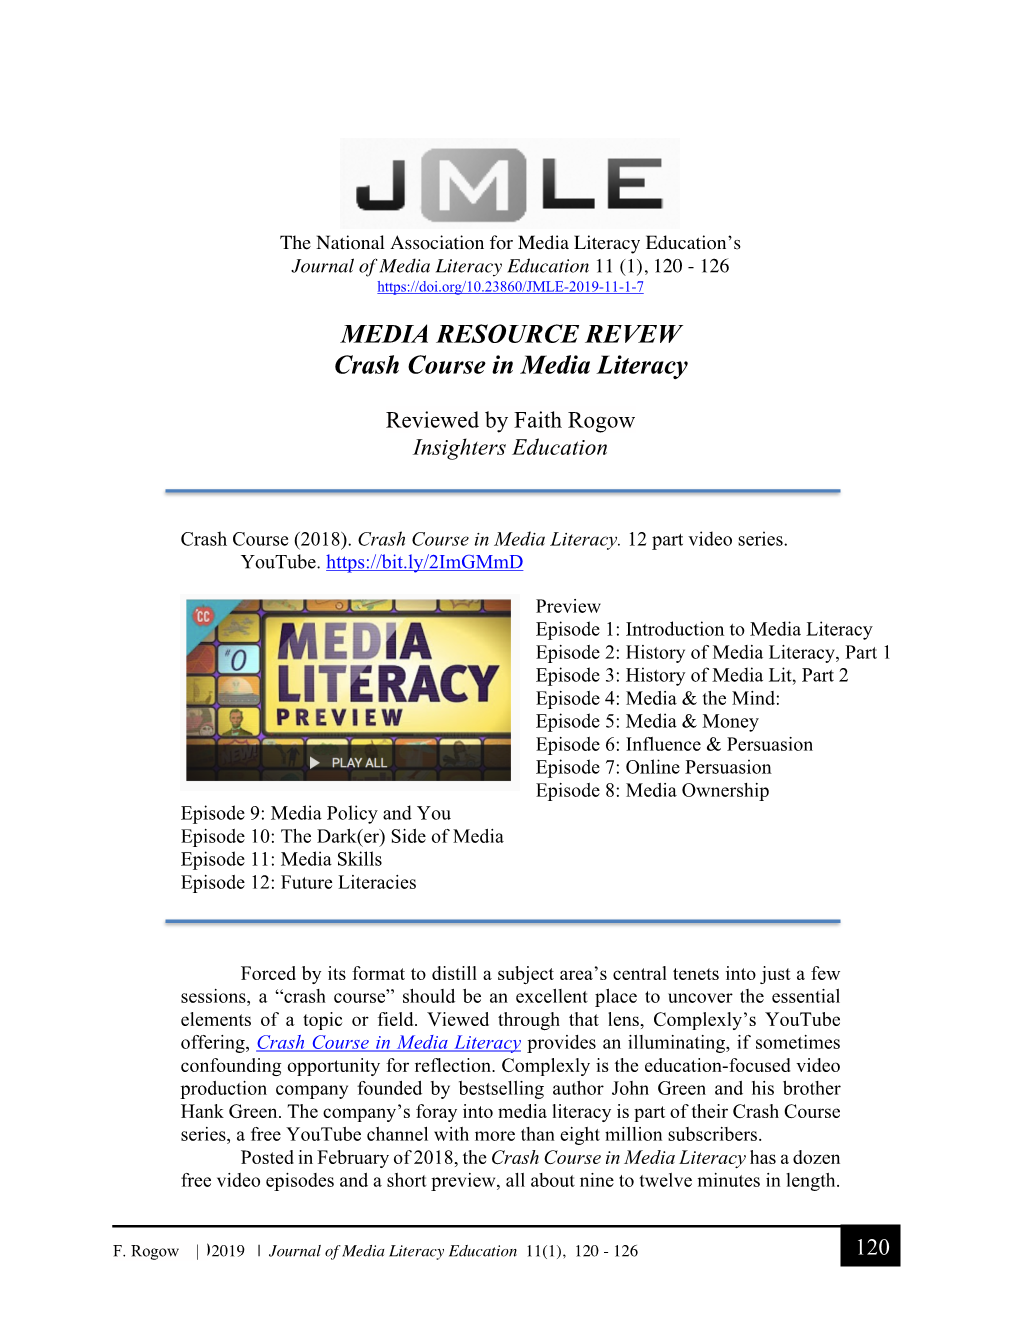 Review: Crash Course in Media Literacy